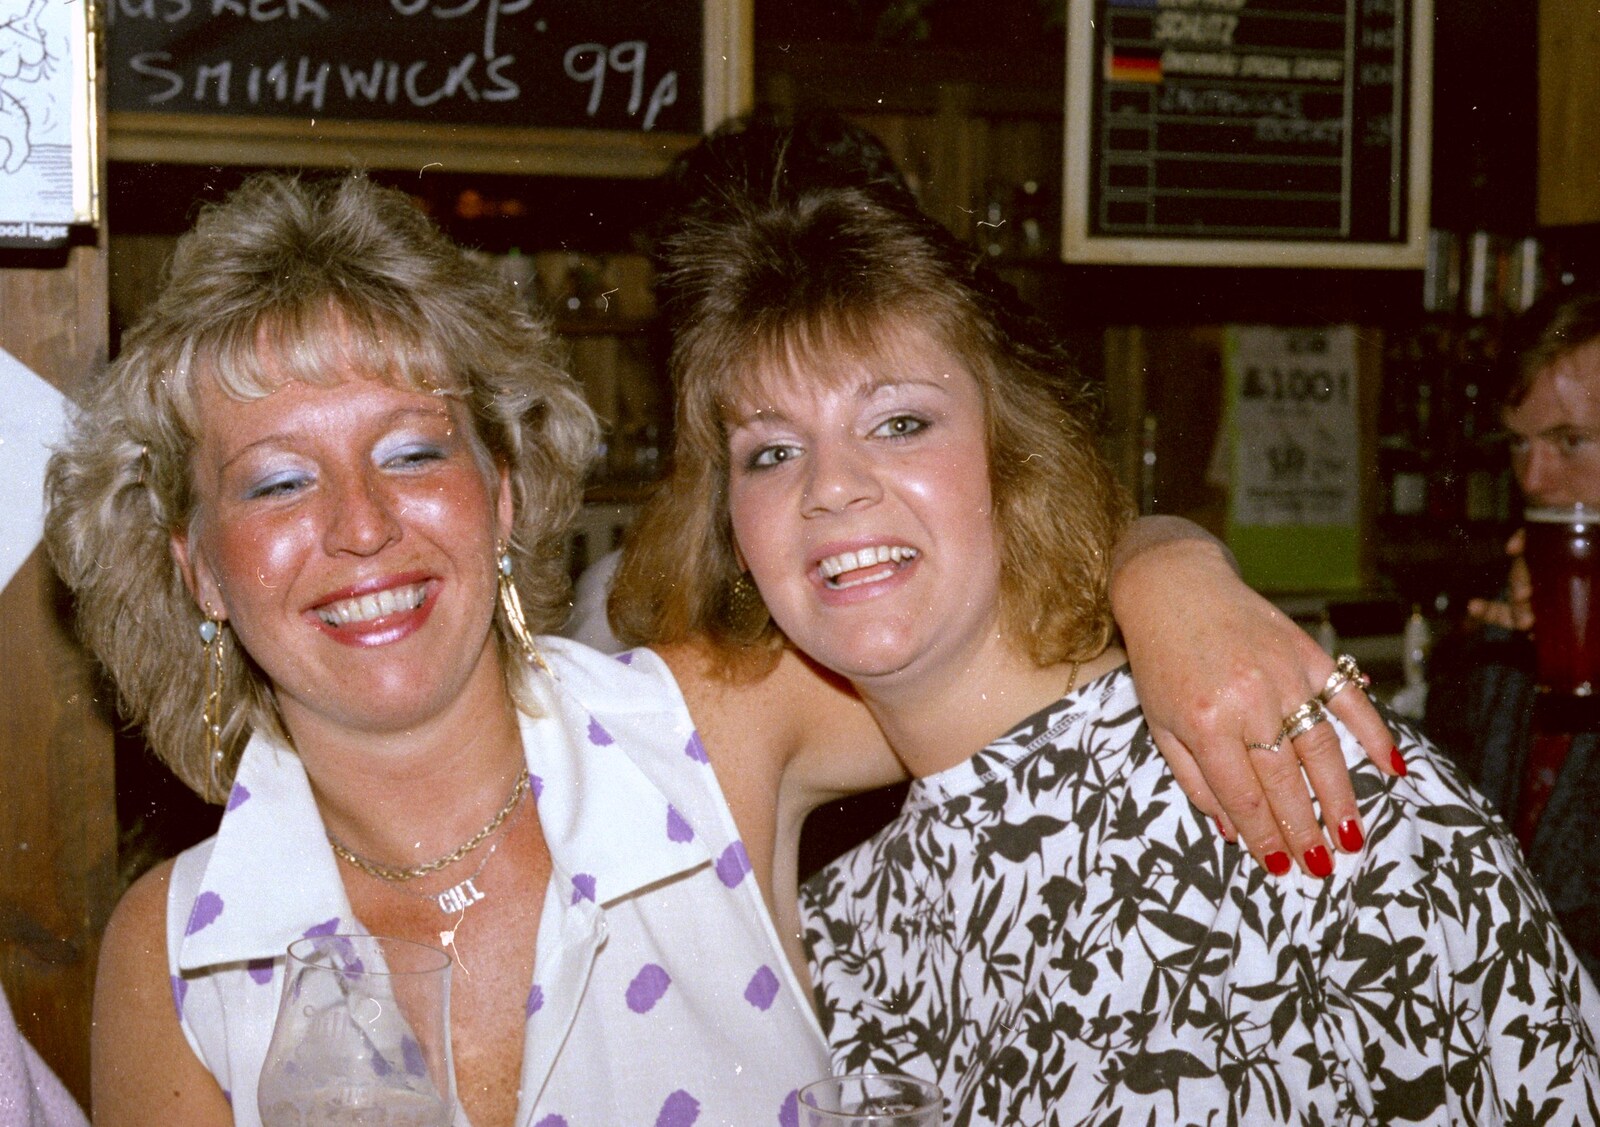 Uni: Gill Leaves the James Street Vaults, Plymouth - 30th May 1986: Gill and one of the bar staff